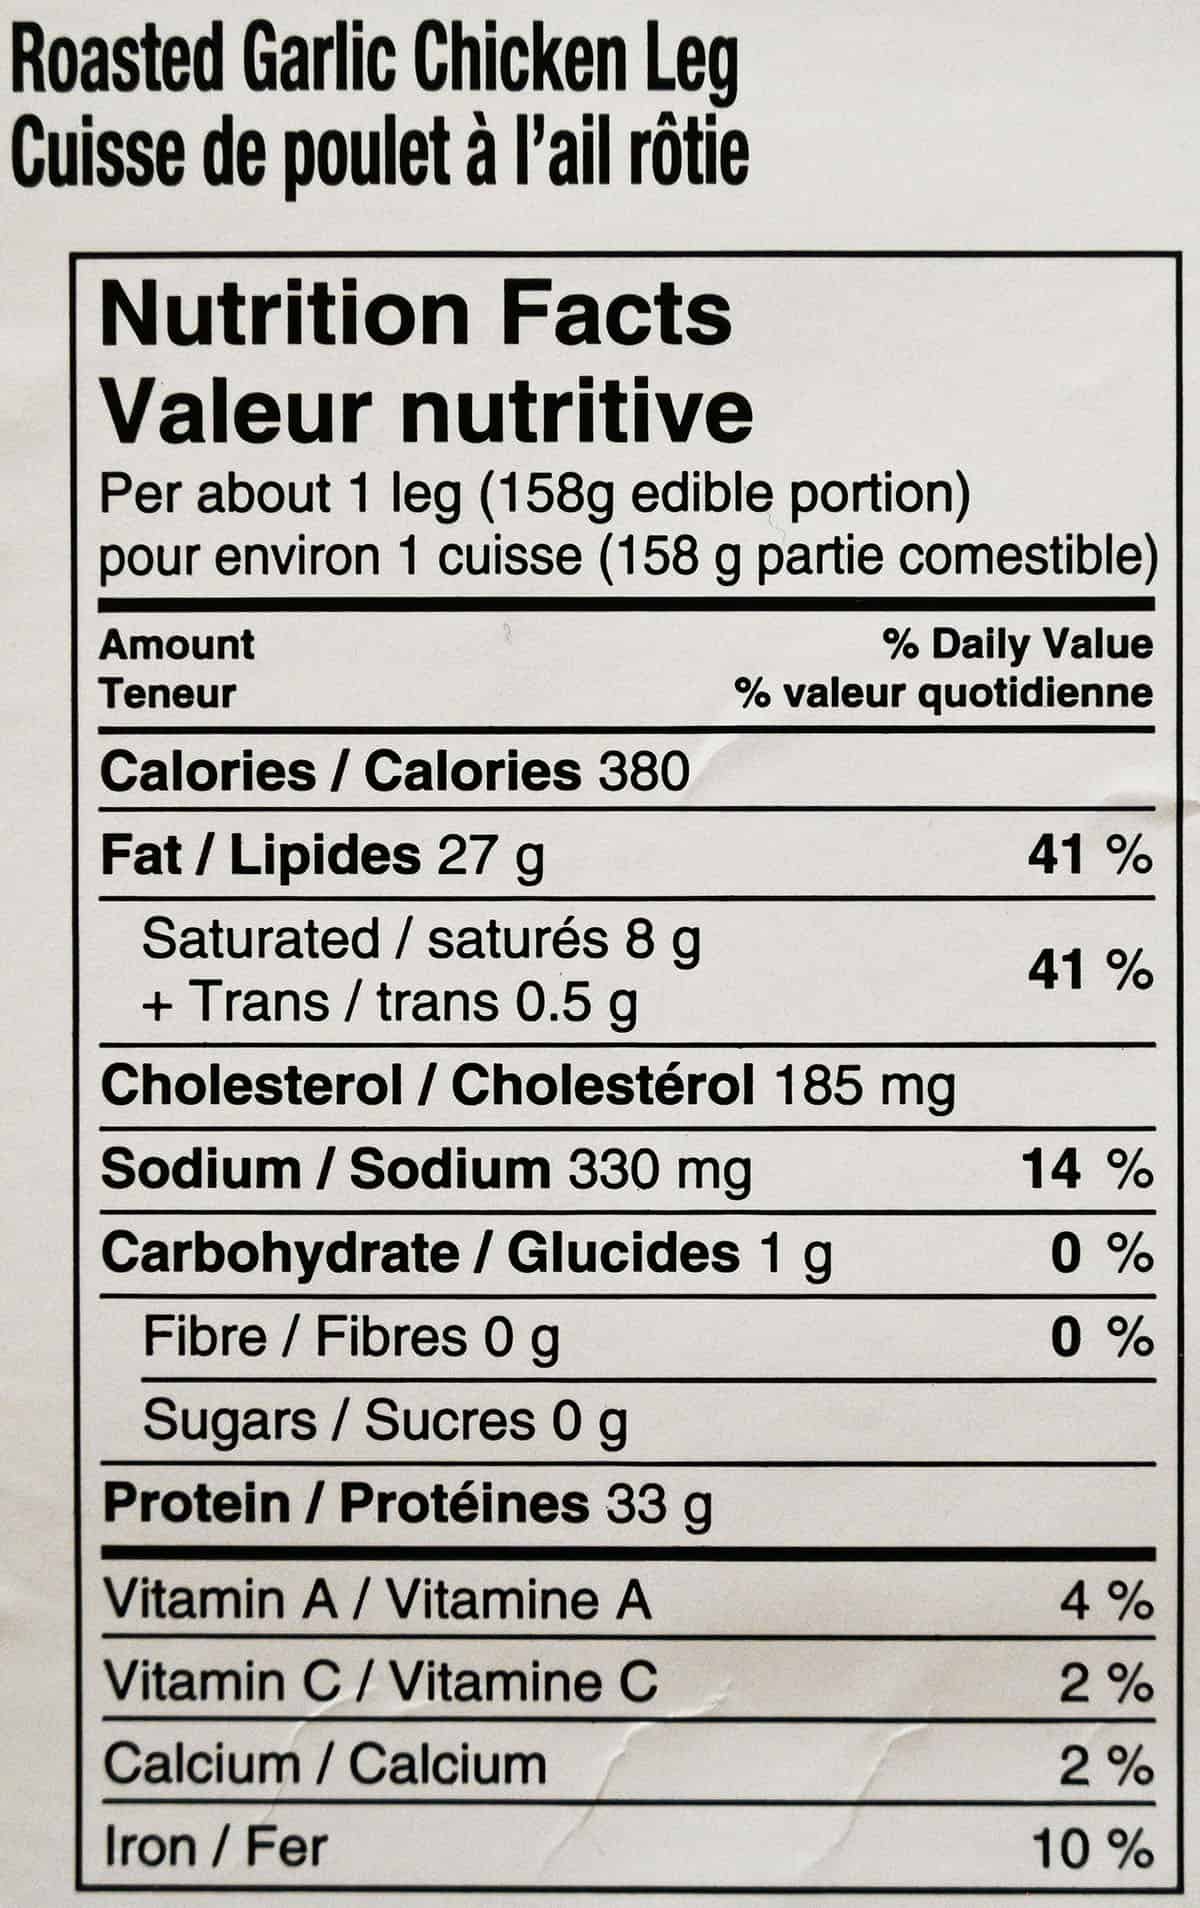 Costco Roasted Garlic Chicken Legs nutrition facts label from the package.